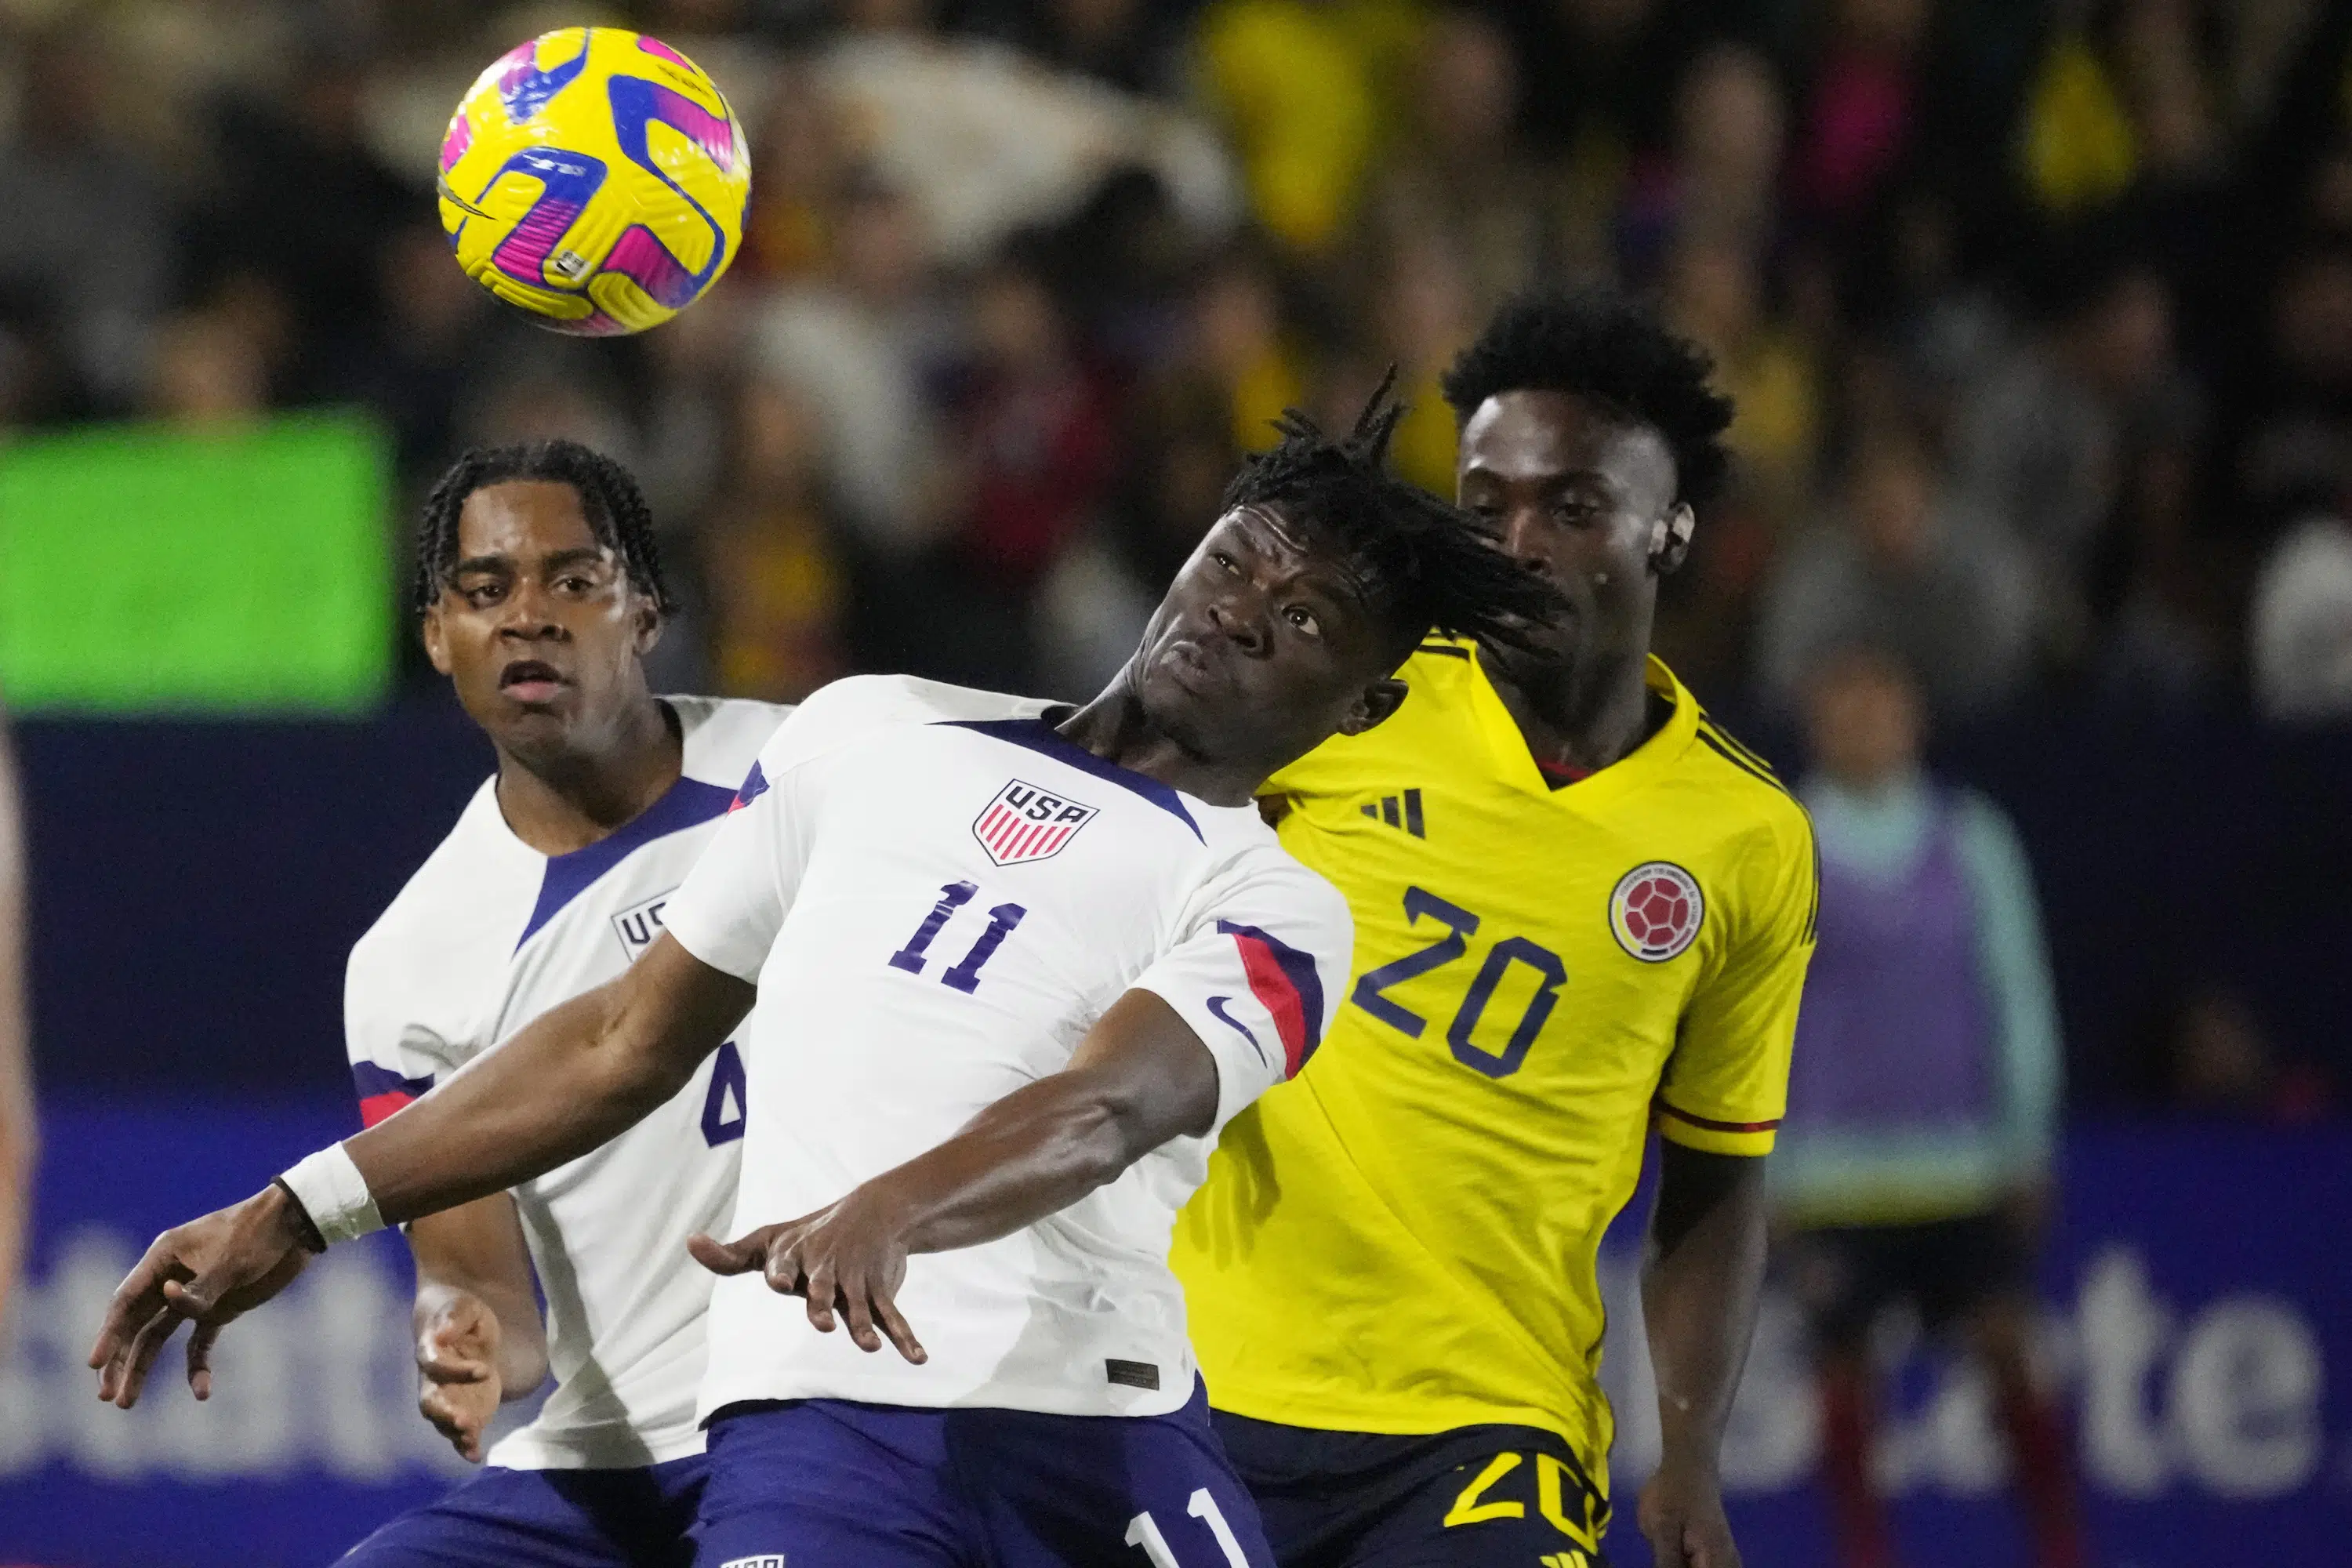 The USA and Colombia drew 0-0 in a friendly match